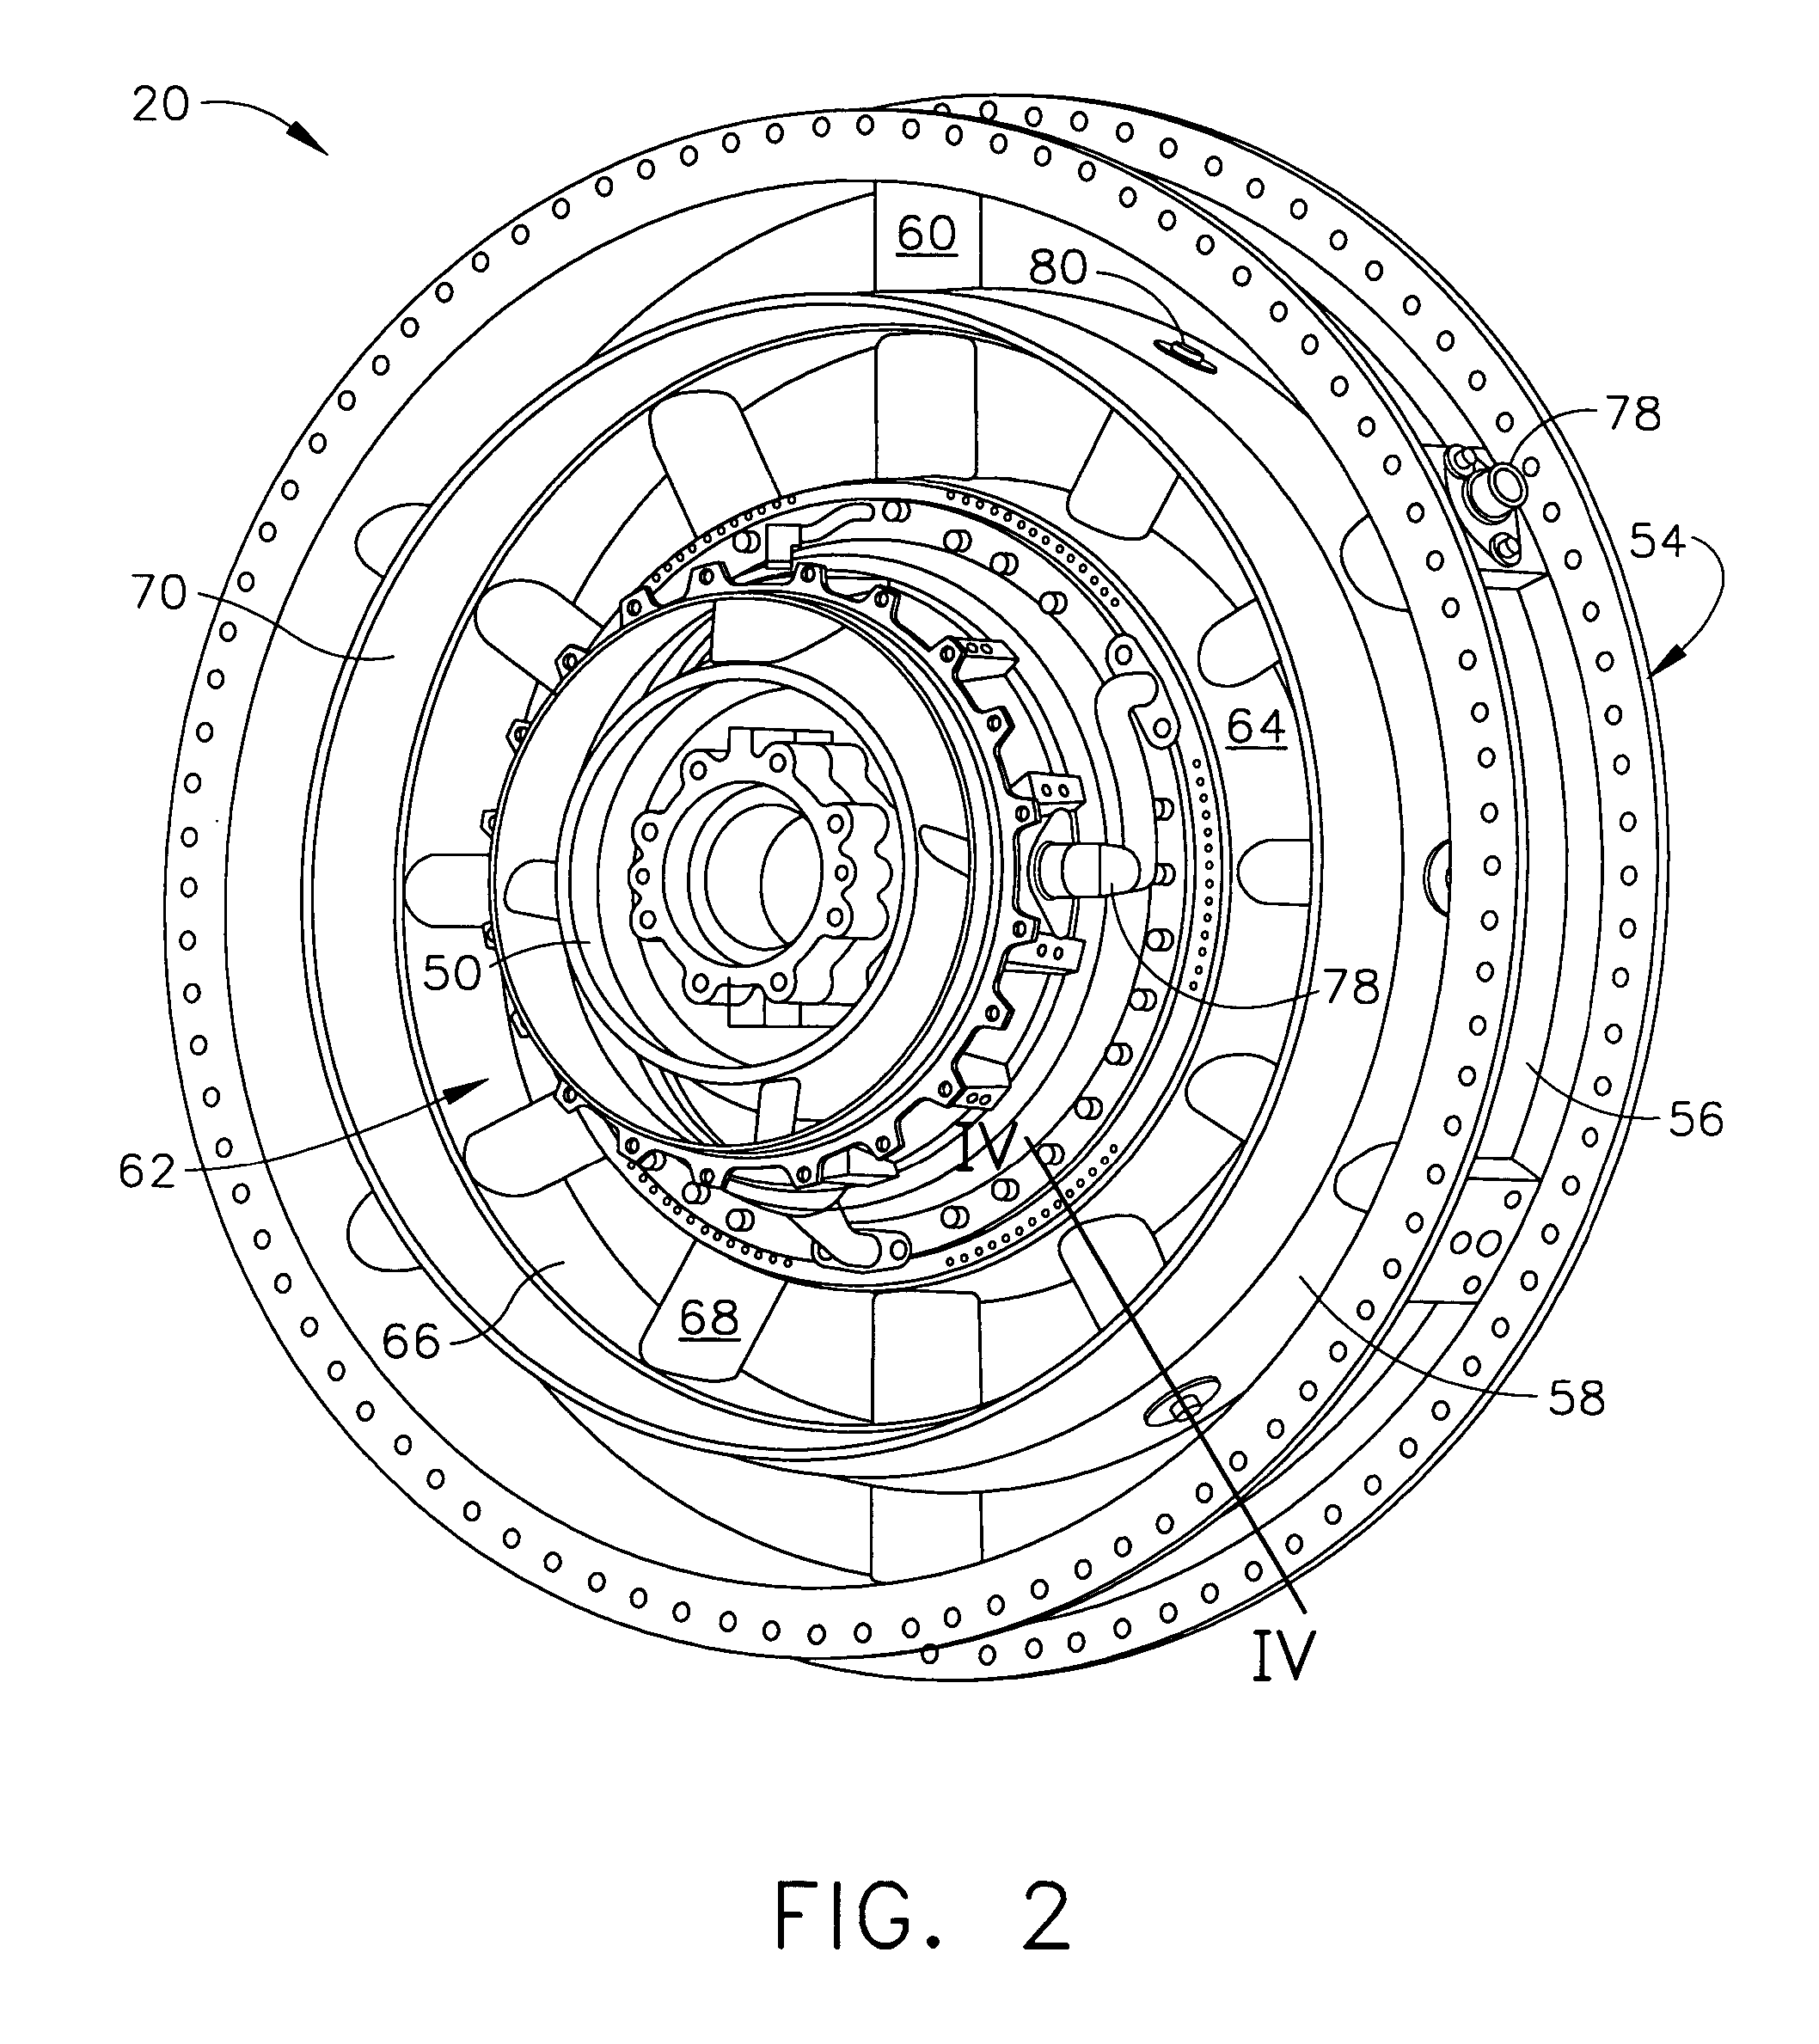 Secondary flow, high pressure turbine module cooling air system for recuperated gas turbine engines